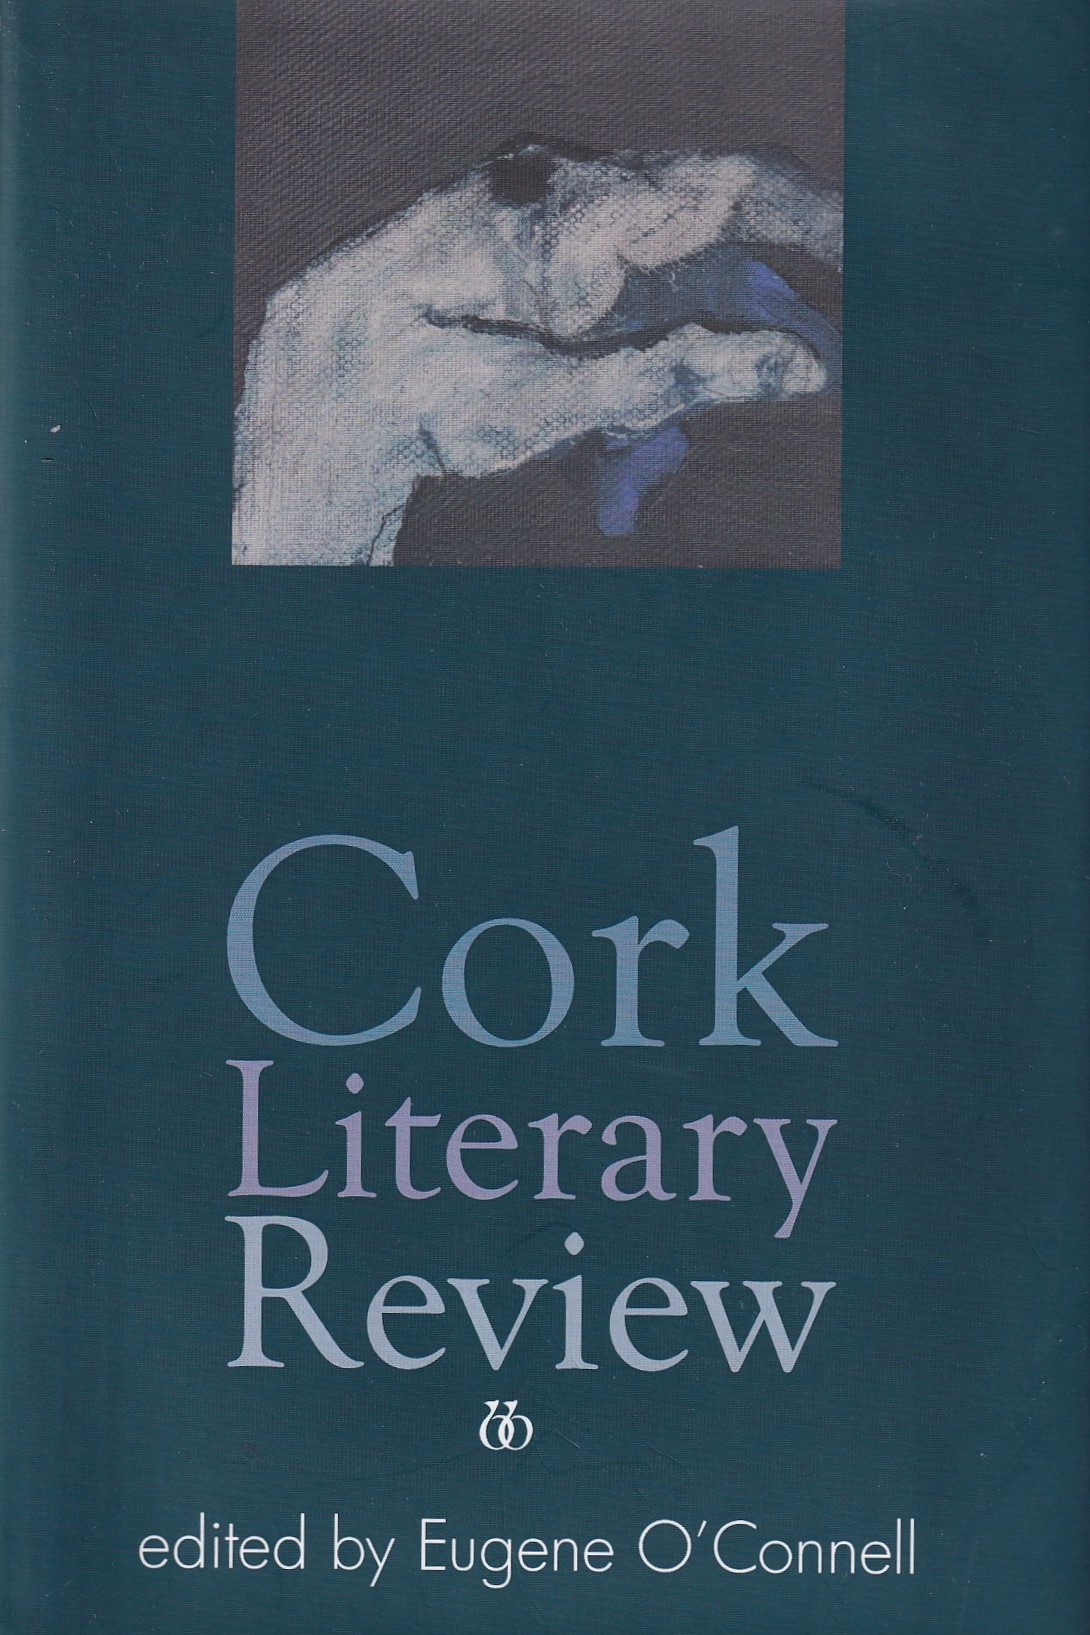 Cork Literary Review No. XIV by Eugene O'Connell (ed.)